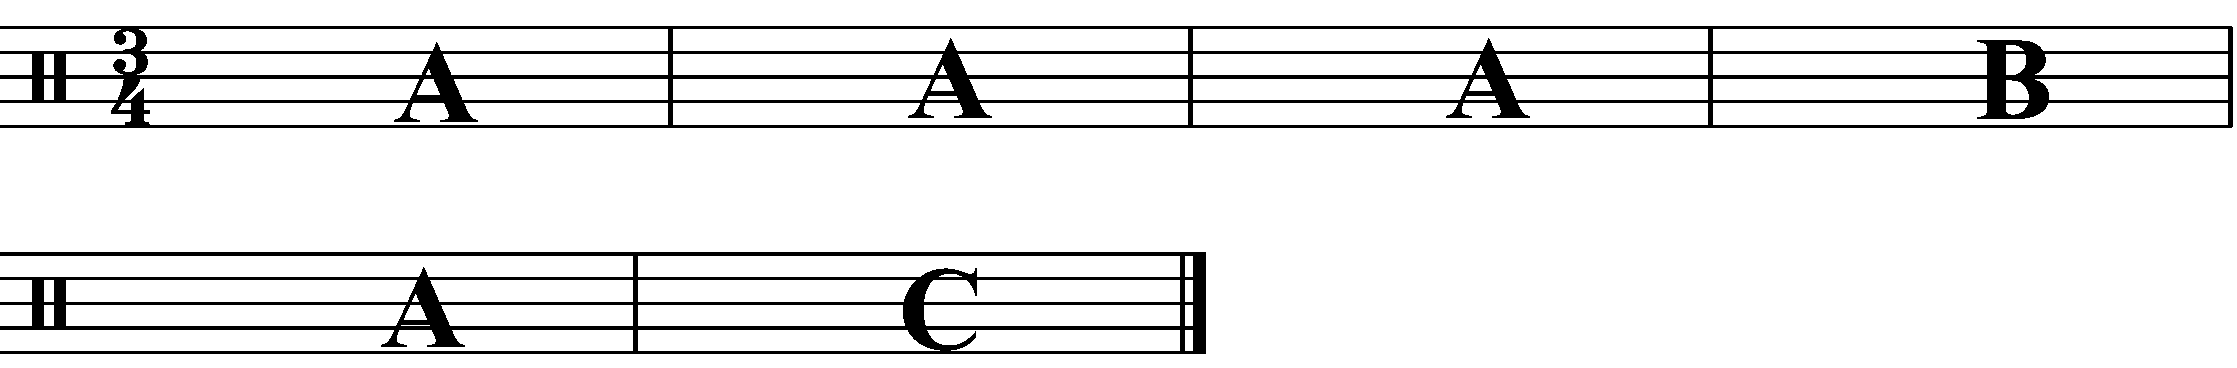 A six bar phrase made up of multiple sections